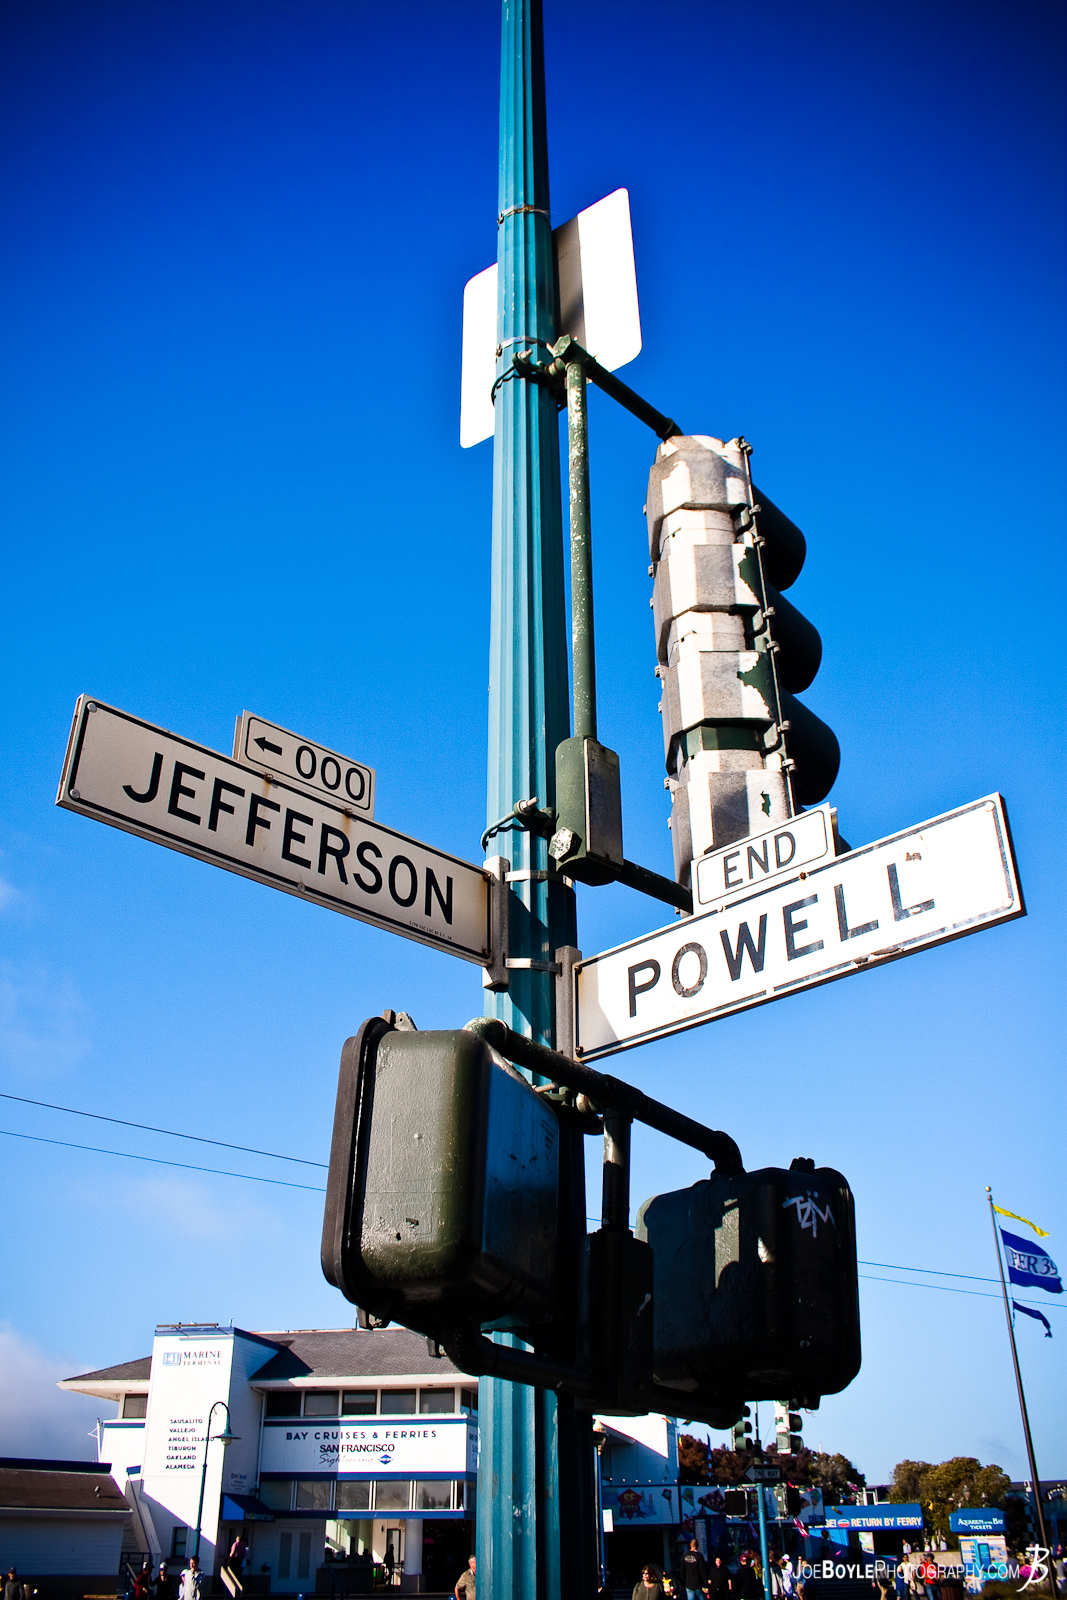  The intersection of two streets in San Francisco. I only had about 9-10 hours in San Francisco and I was walking all around the city. I like this image because it reminds me of a little piece of what \every day\ looks like to pedestrians, drivers and the like in the Bay area. 